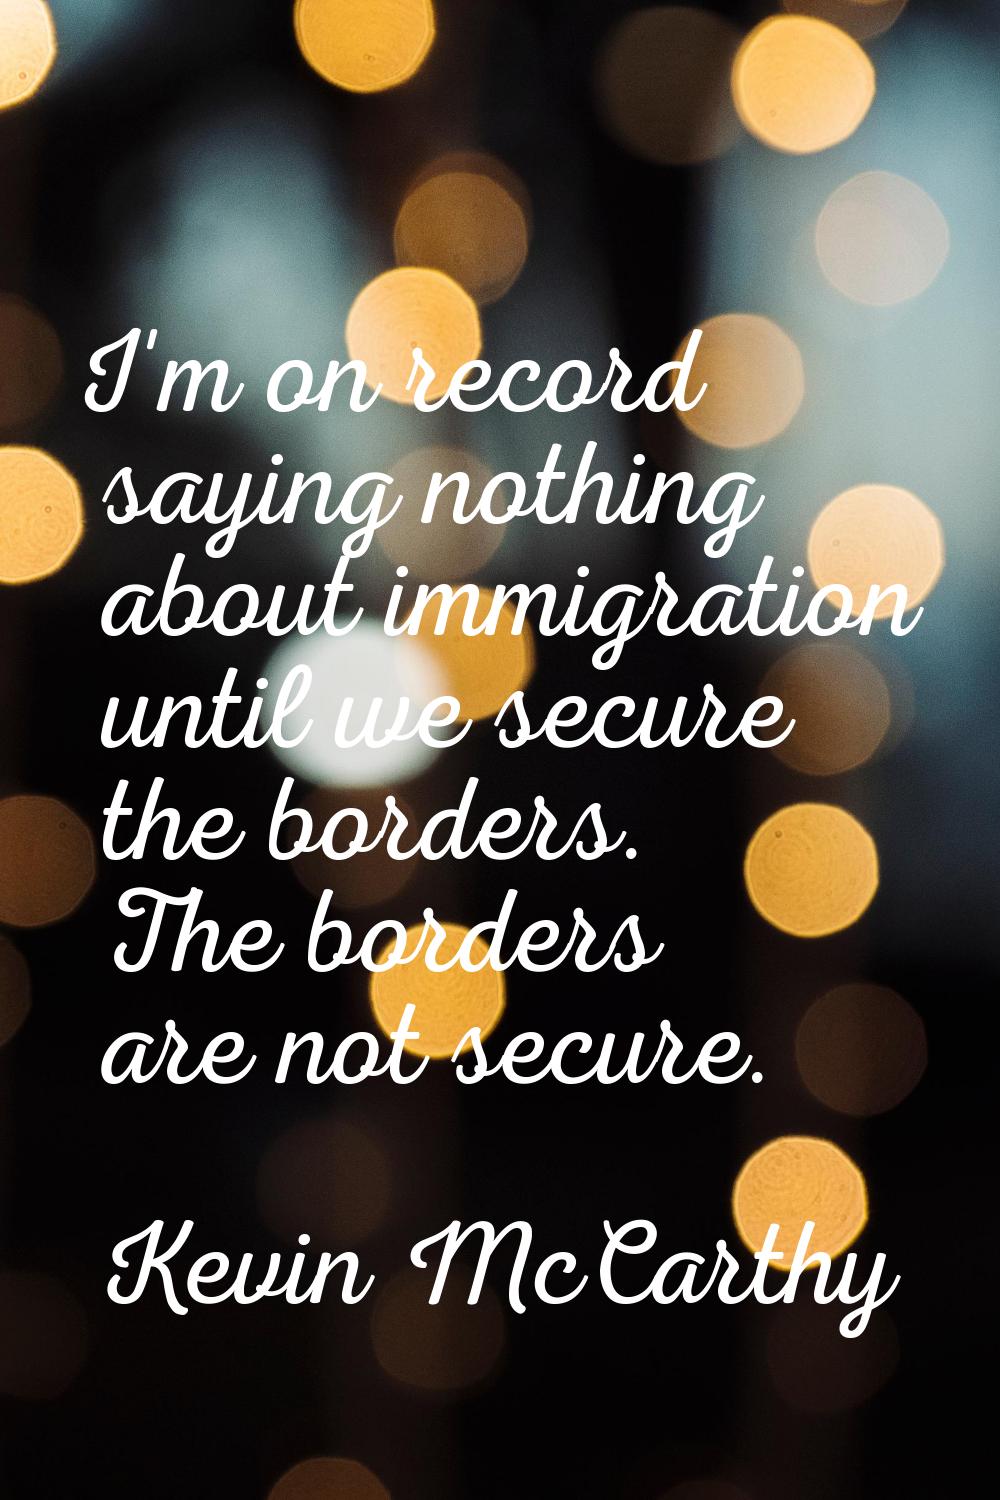 I'm on record saying nothing about immigration until we secure the borders. The borders are not sec